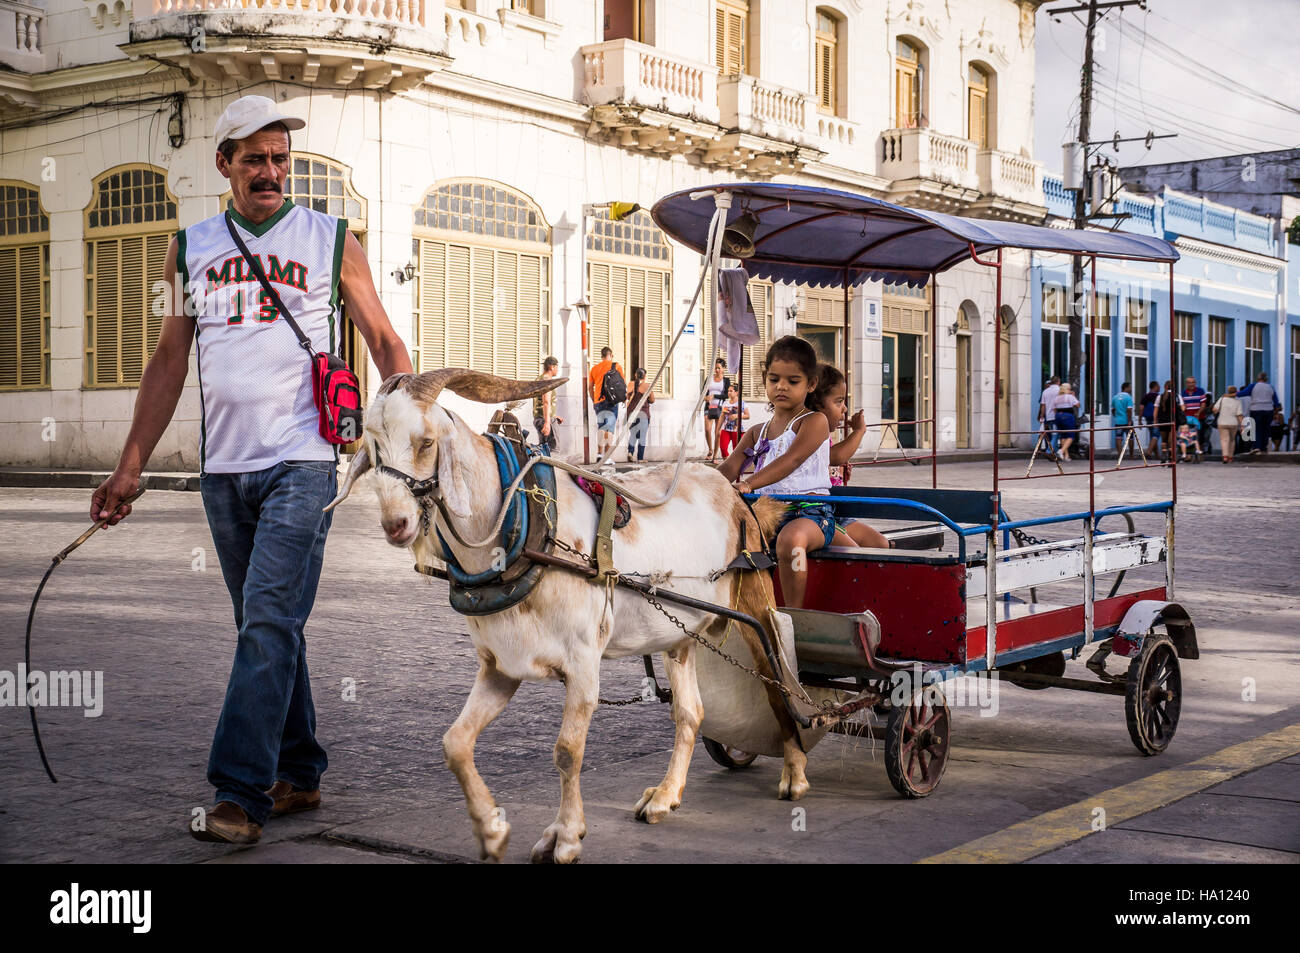 Man with whip guiding goat that pulls kids in carriage Stock Photo